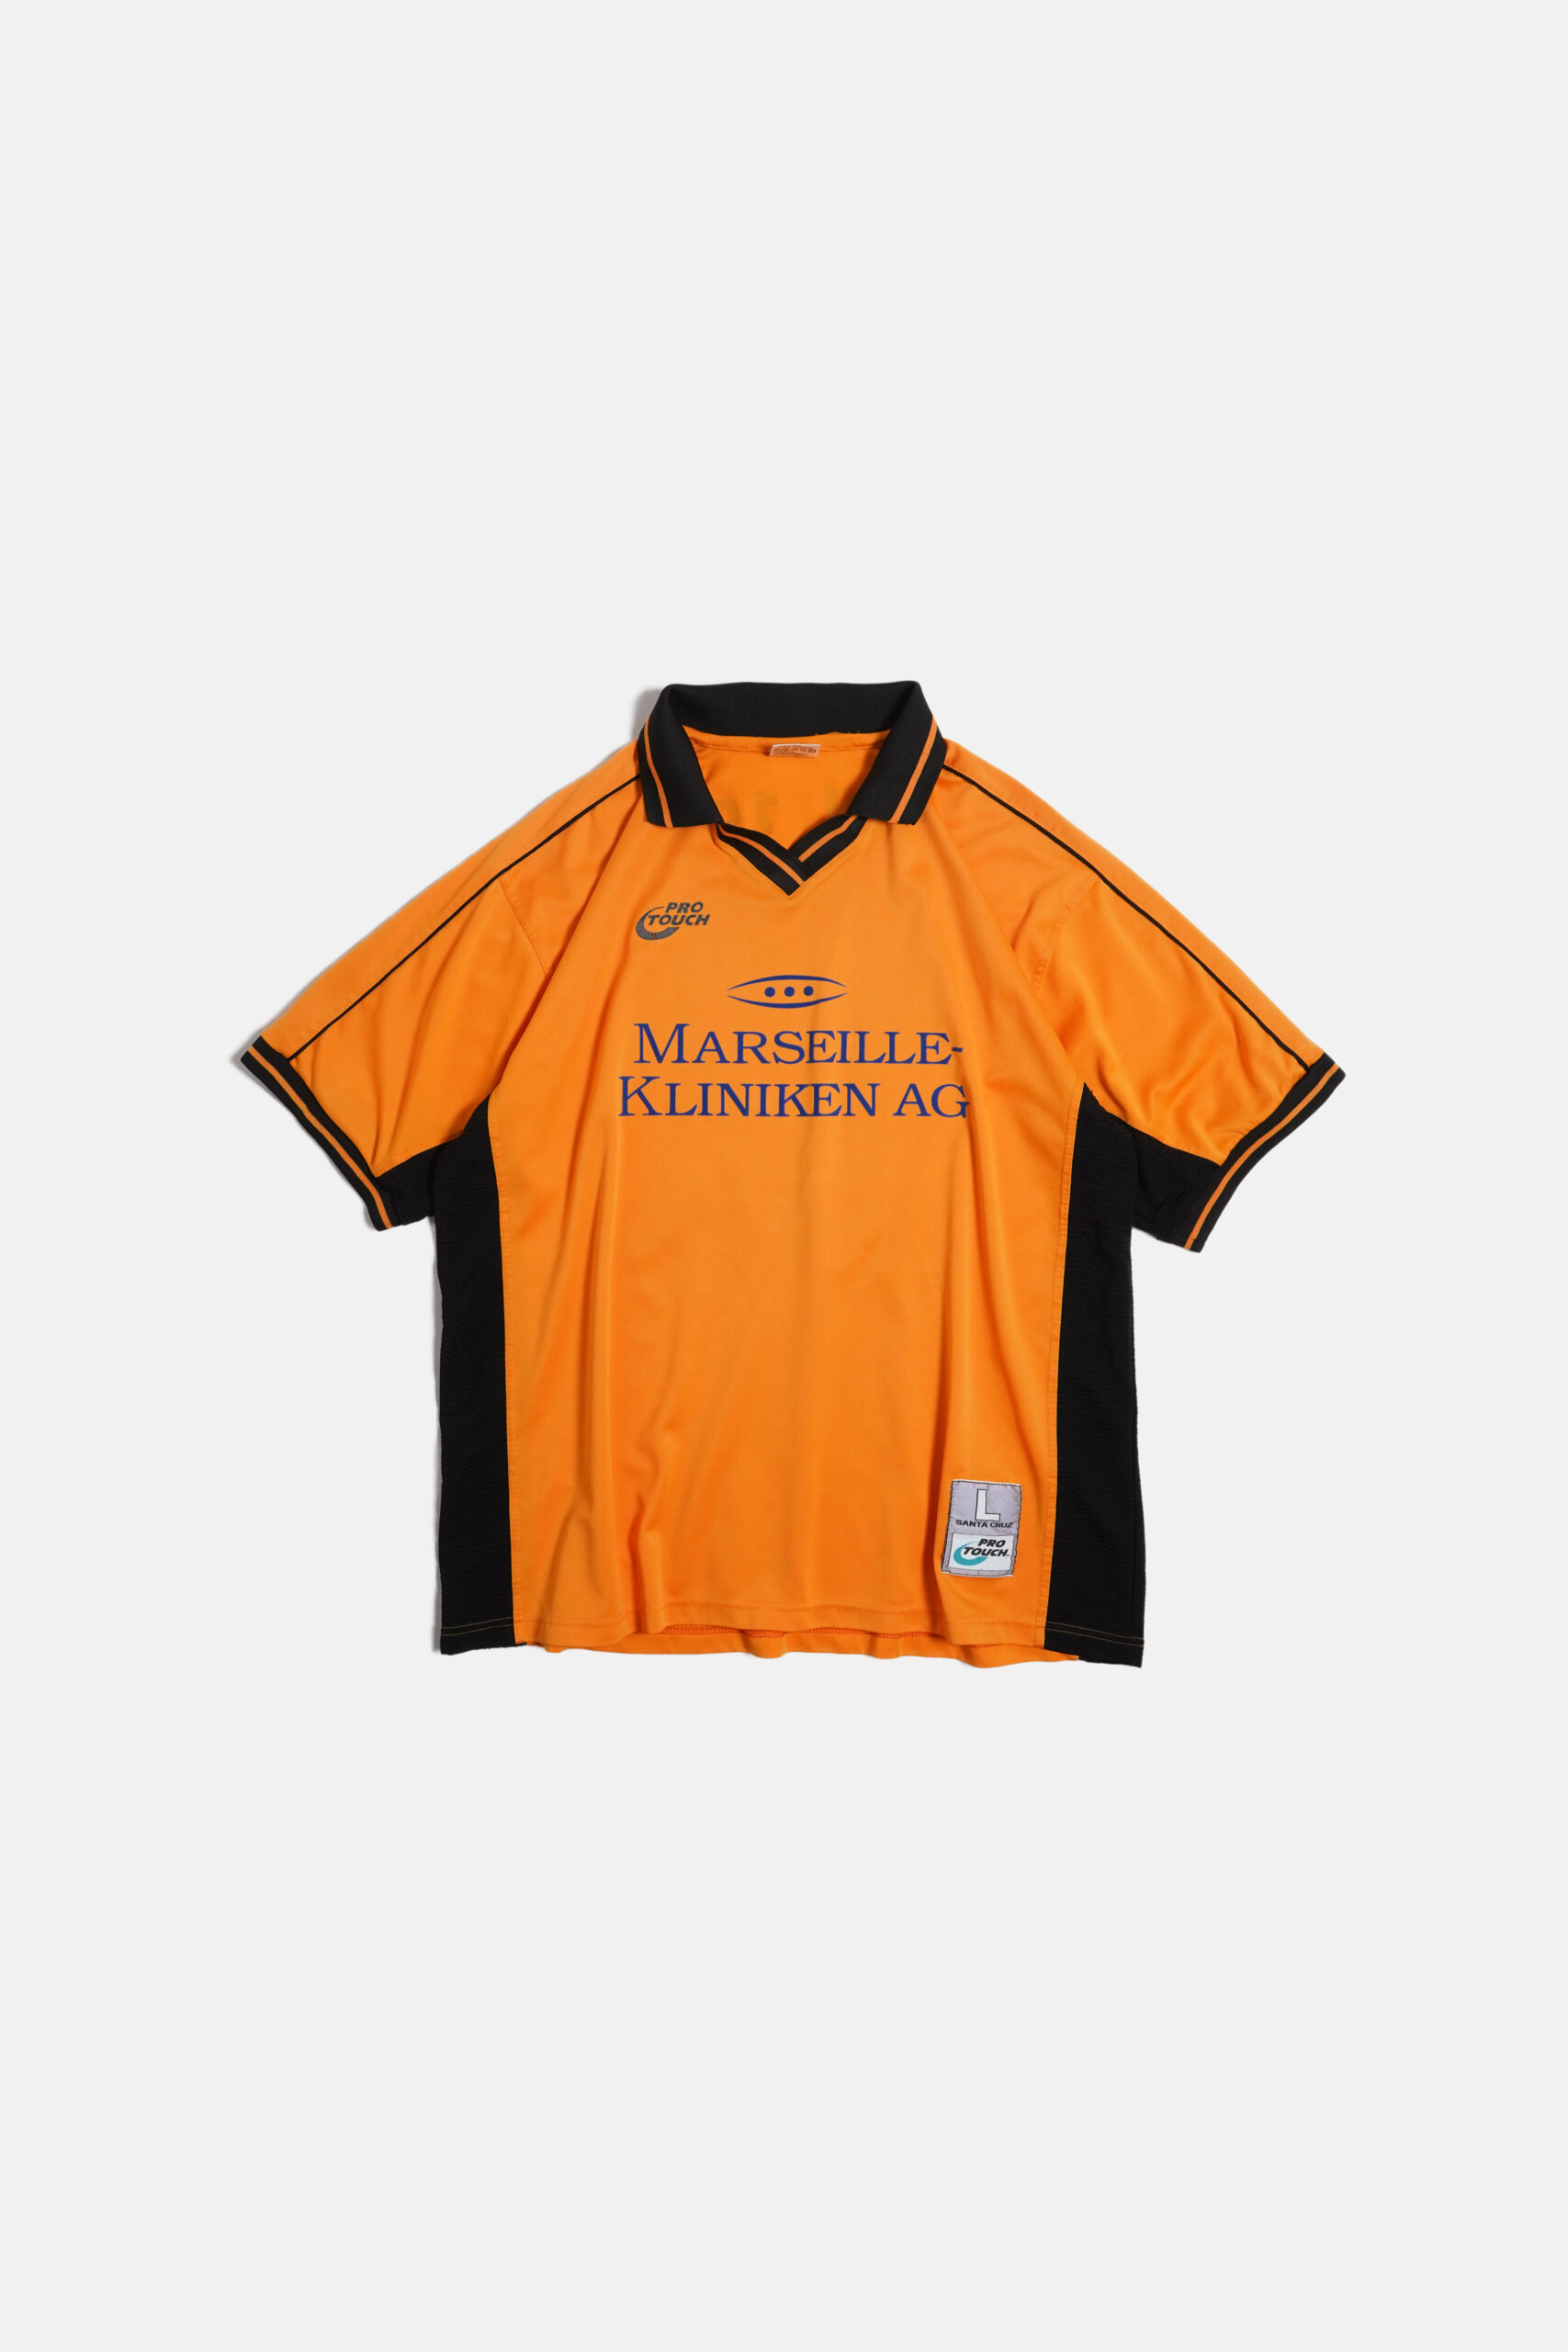 PRO TOUCH GAME SHIRTS